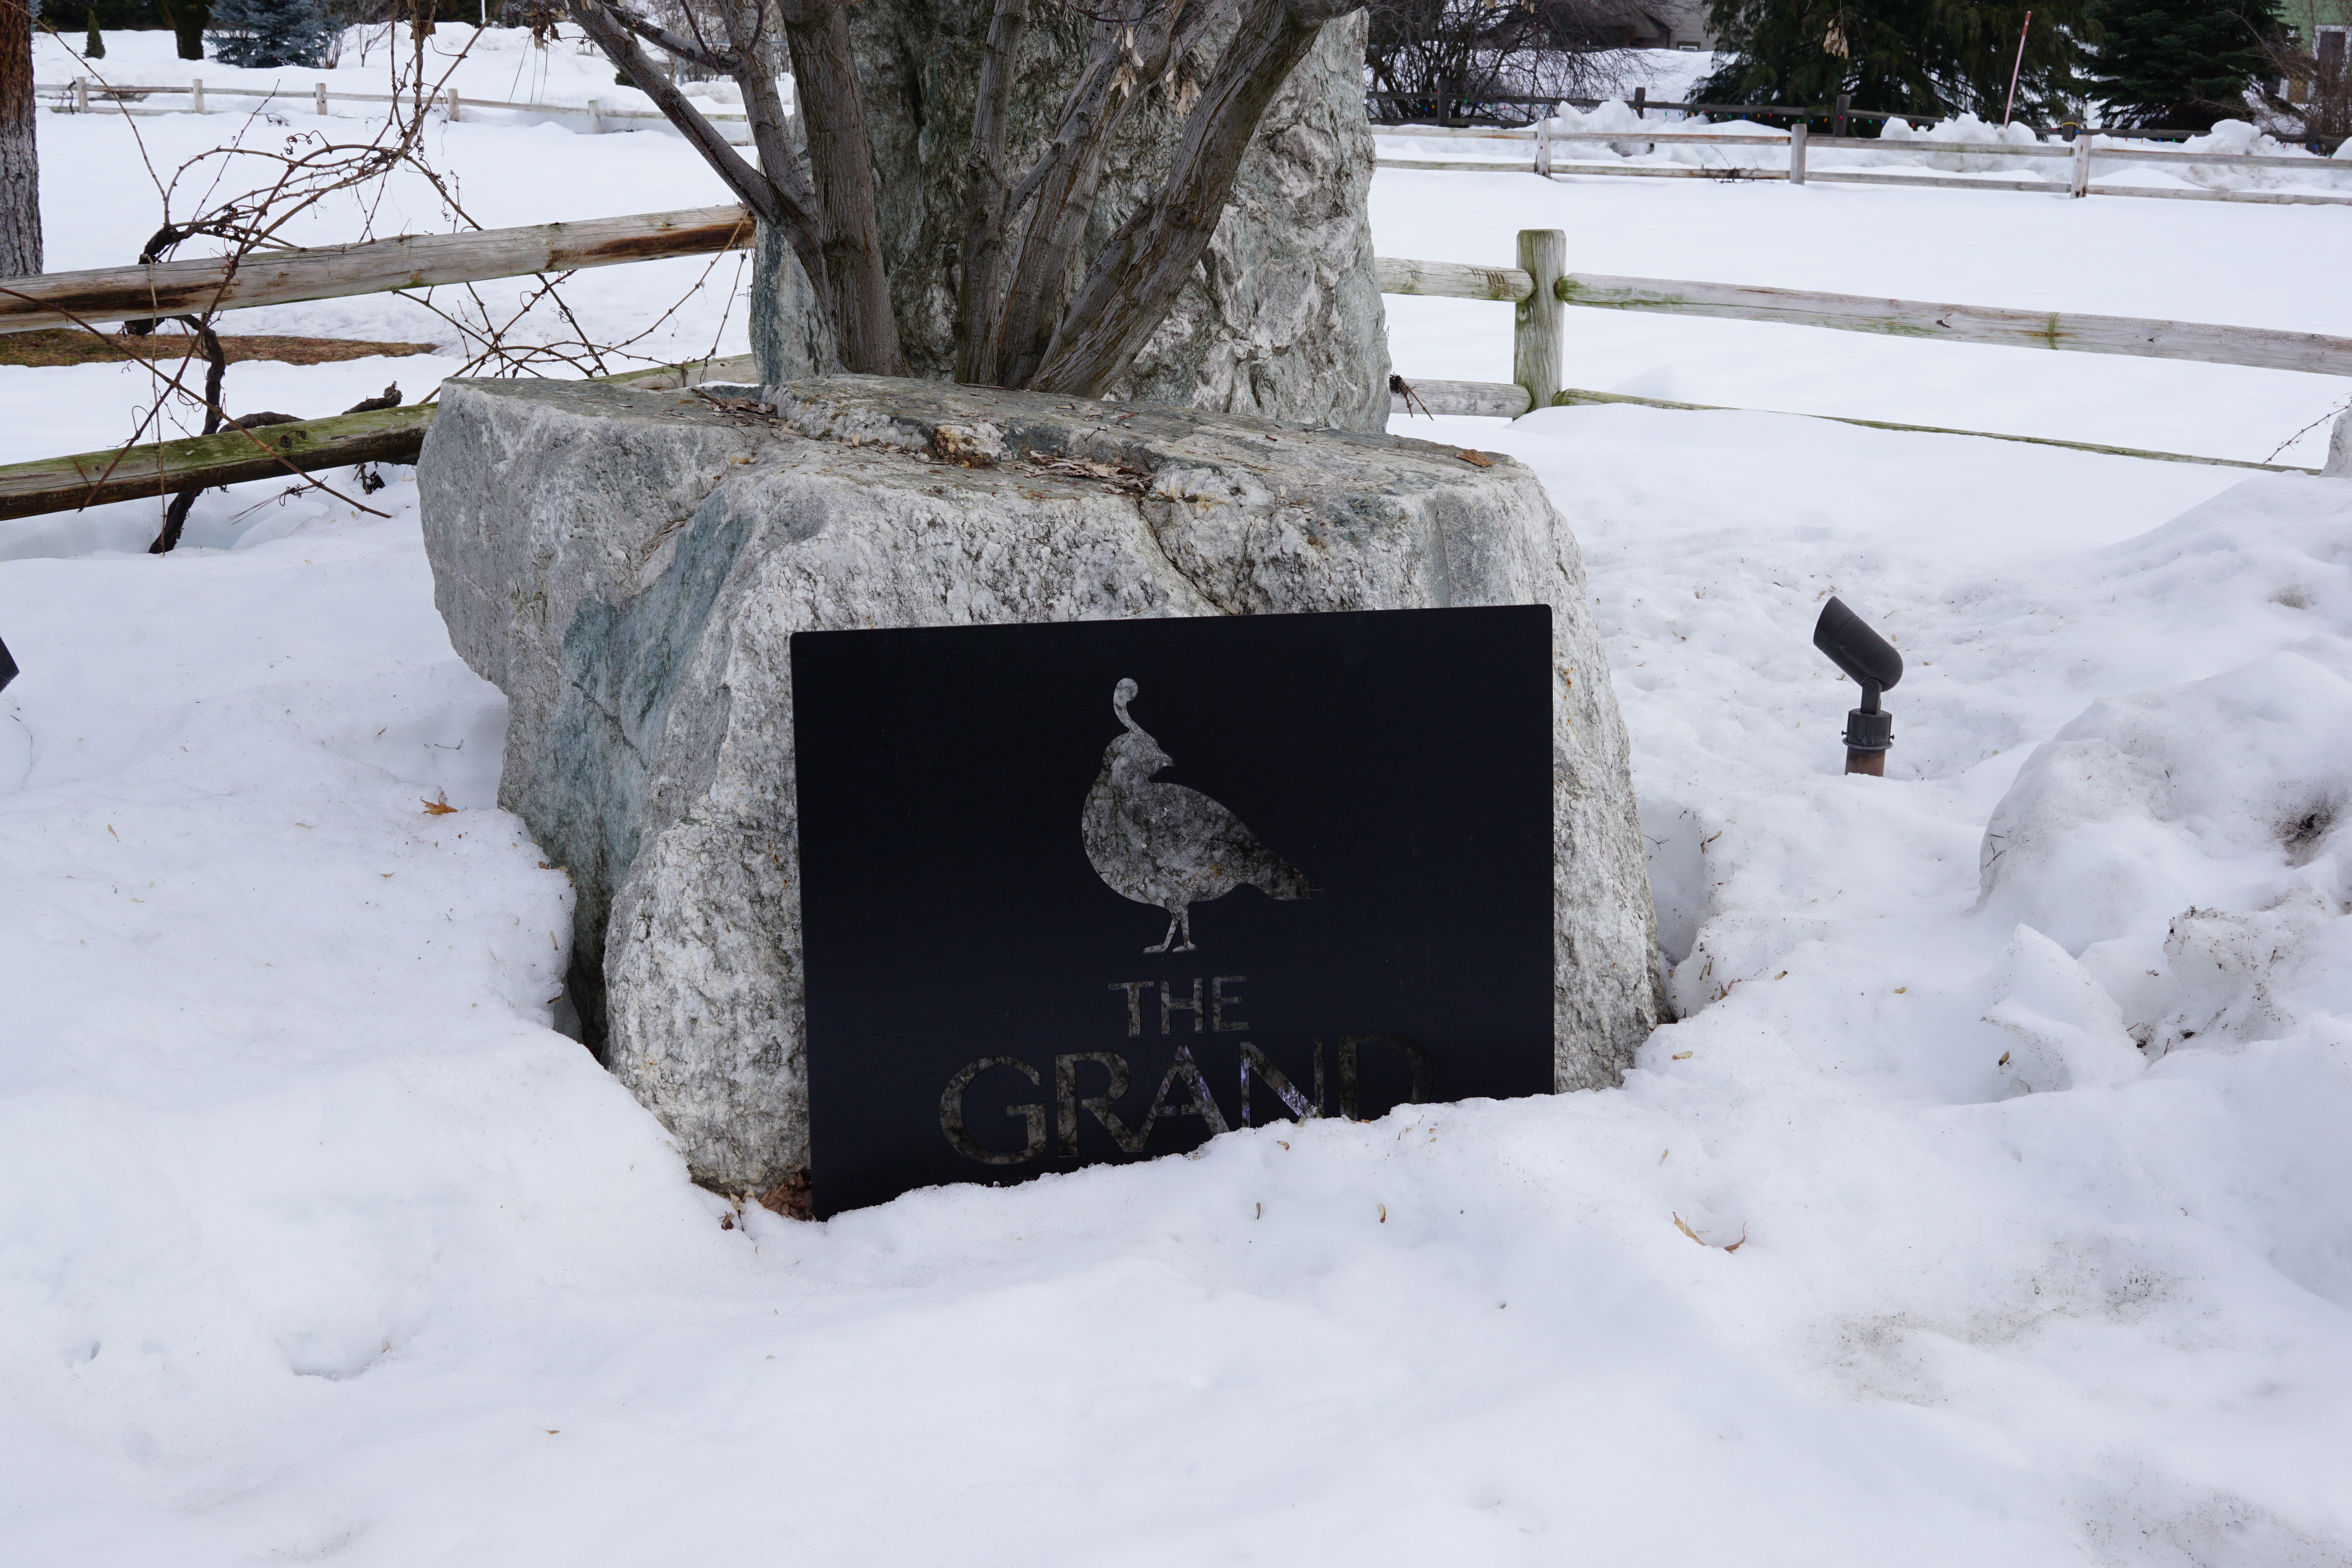 The Grand river lodge sign